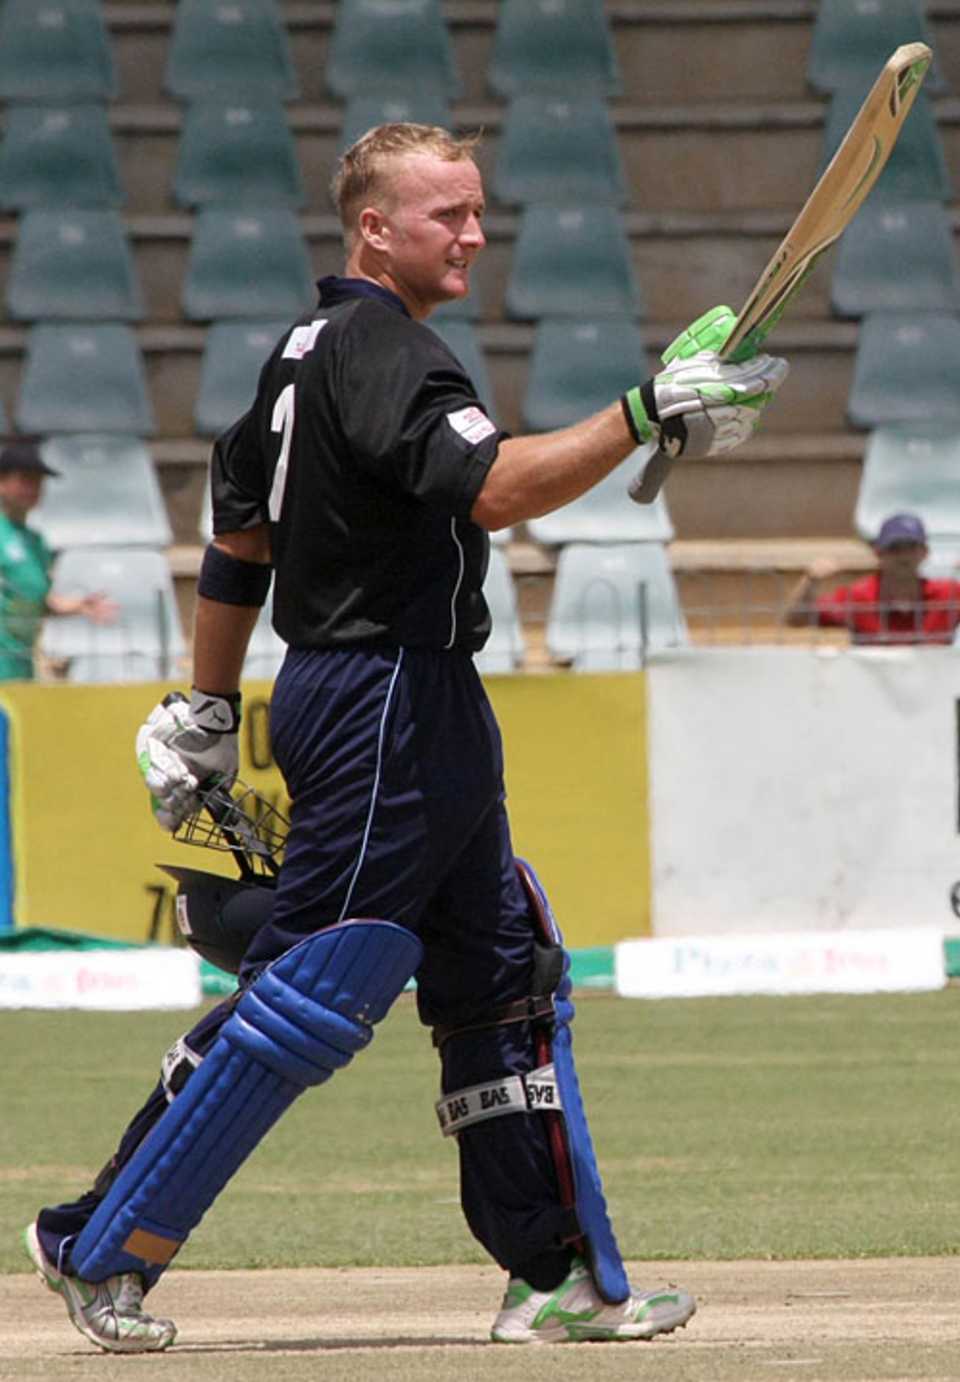 Craig Williams' 50 from 46 balls set up victory for his side over Southern Rocks, Southern Rocks v Desert Vipers, Harare, February 13, 2010